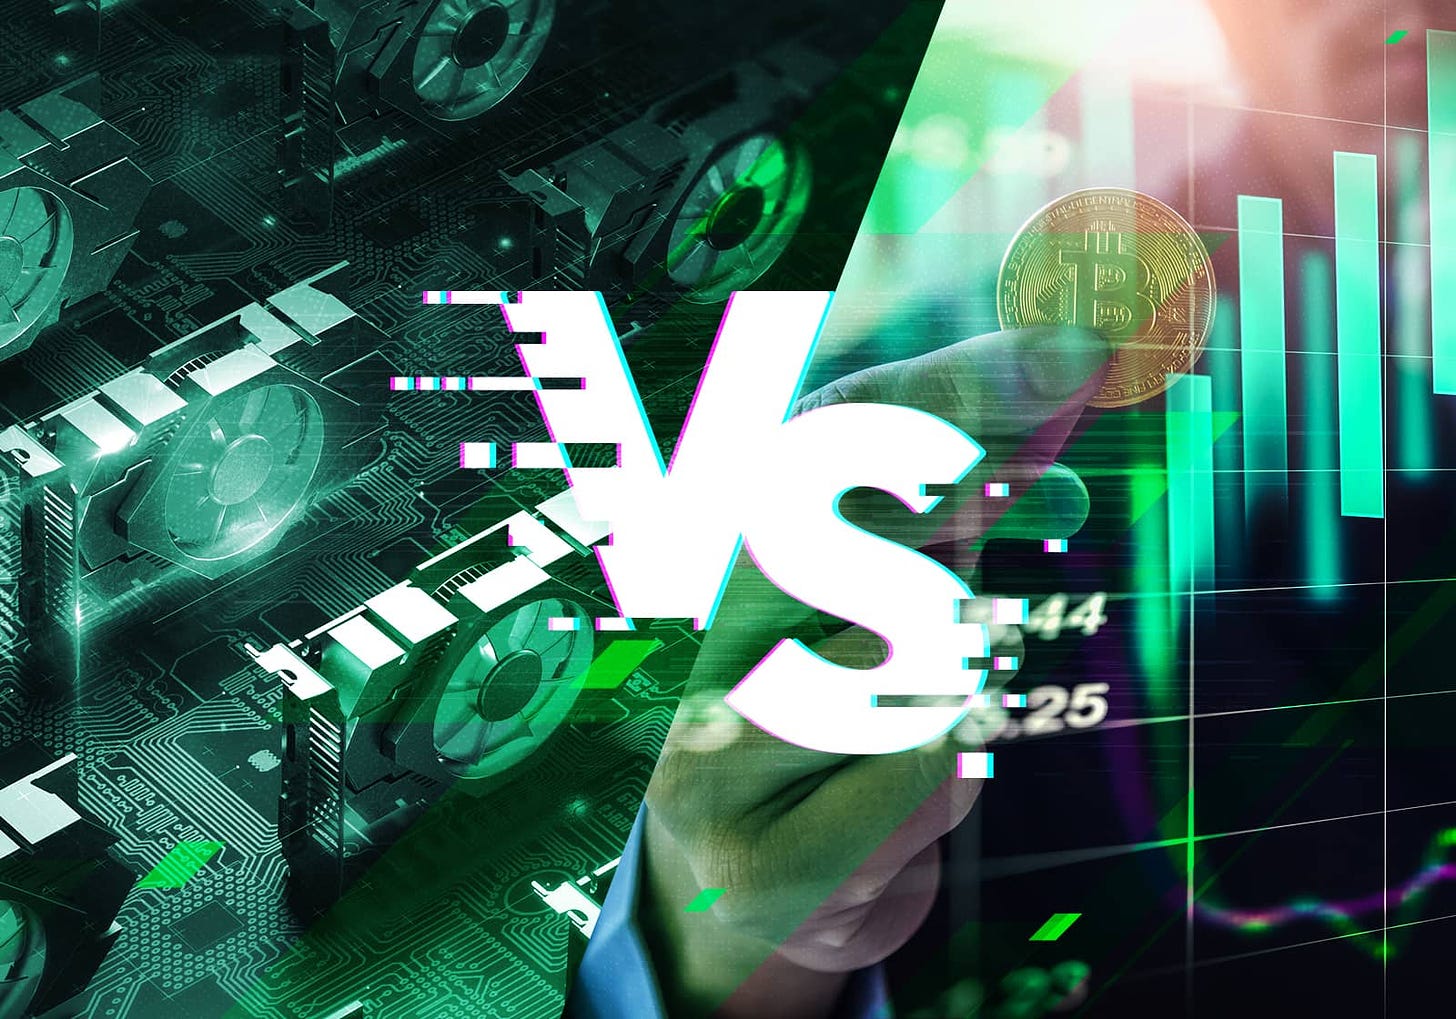 Mining vs Trading: Which is a better way to earn crypto? | StormGain